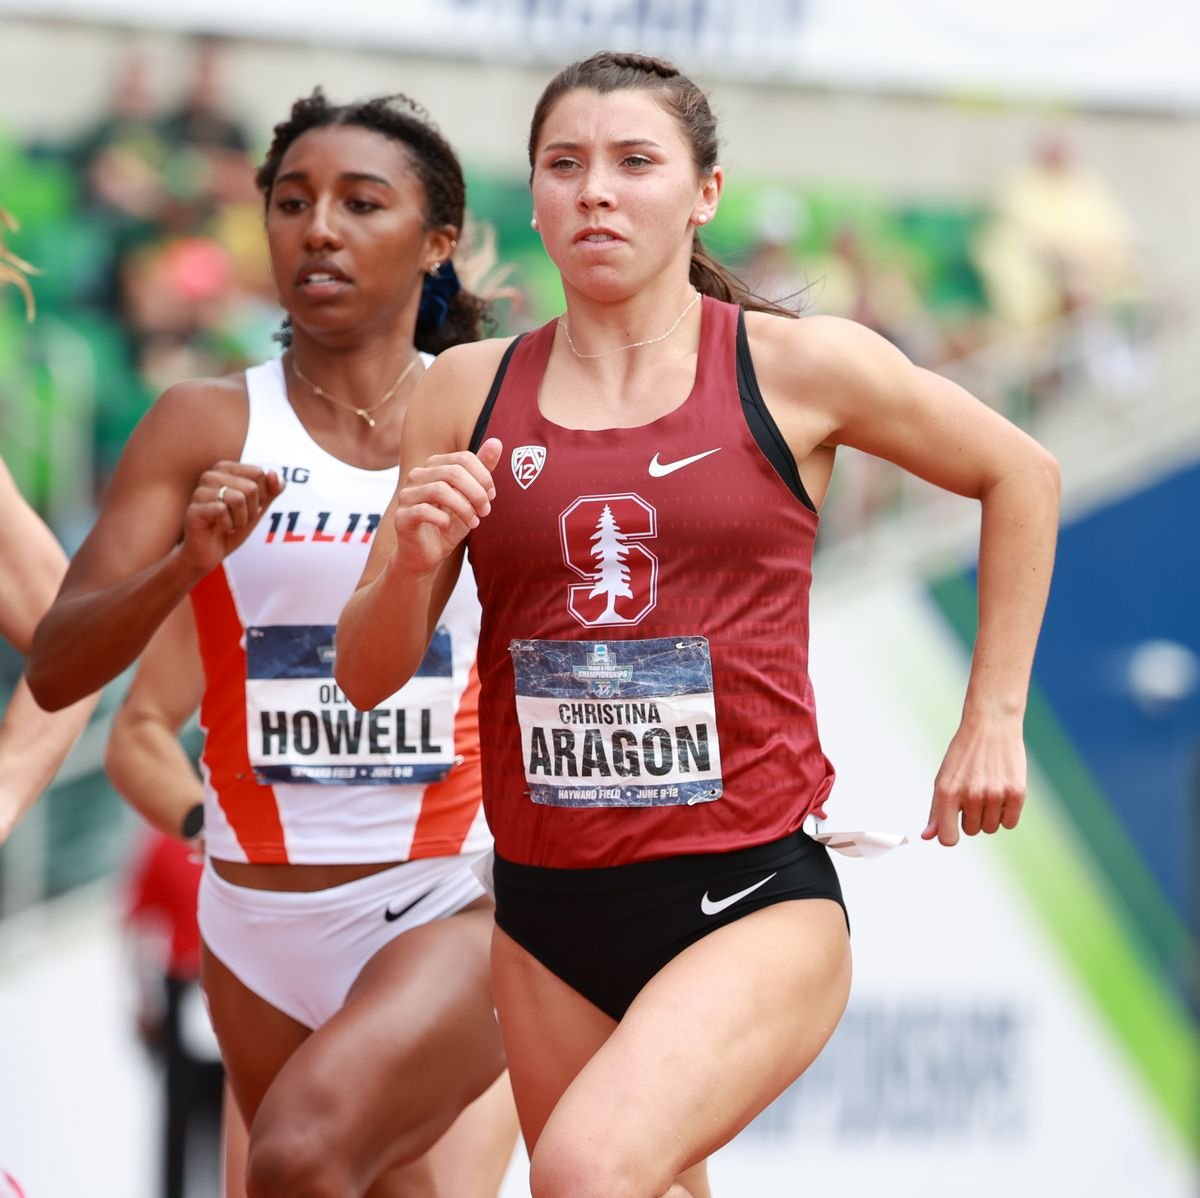 christina-aragon-of-the-stanford-cardinal-competes-in-the-news-photo-1663792922-2.jpg